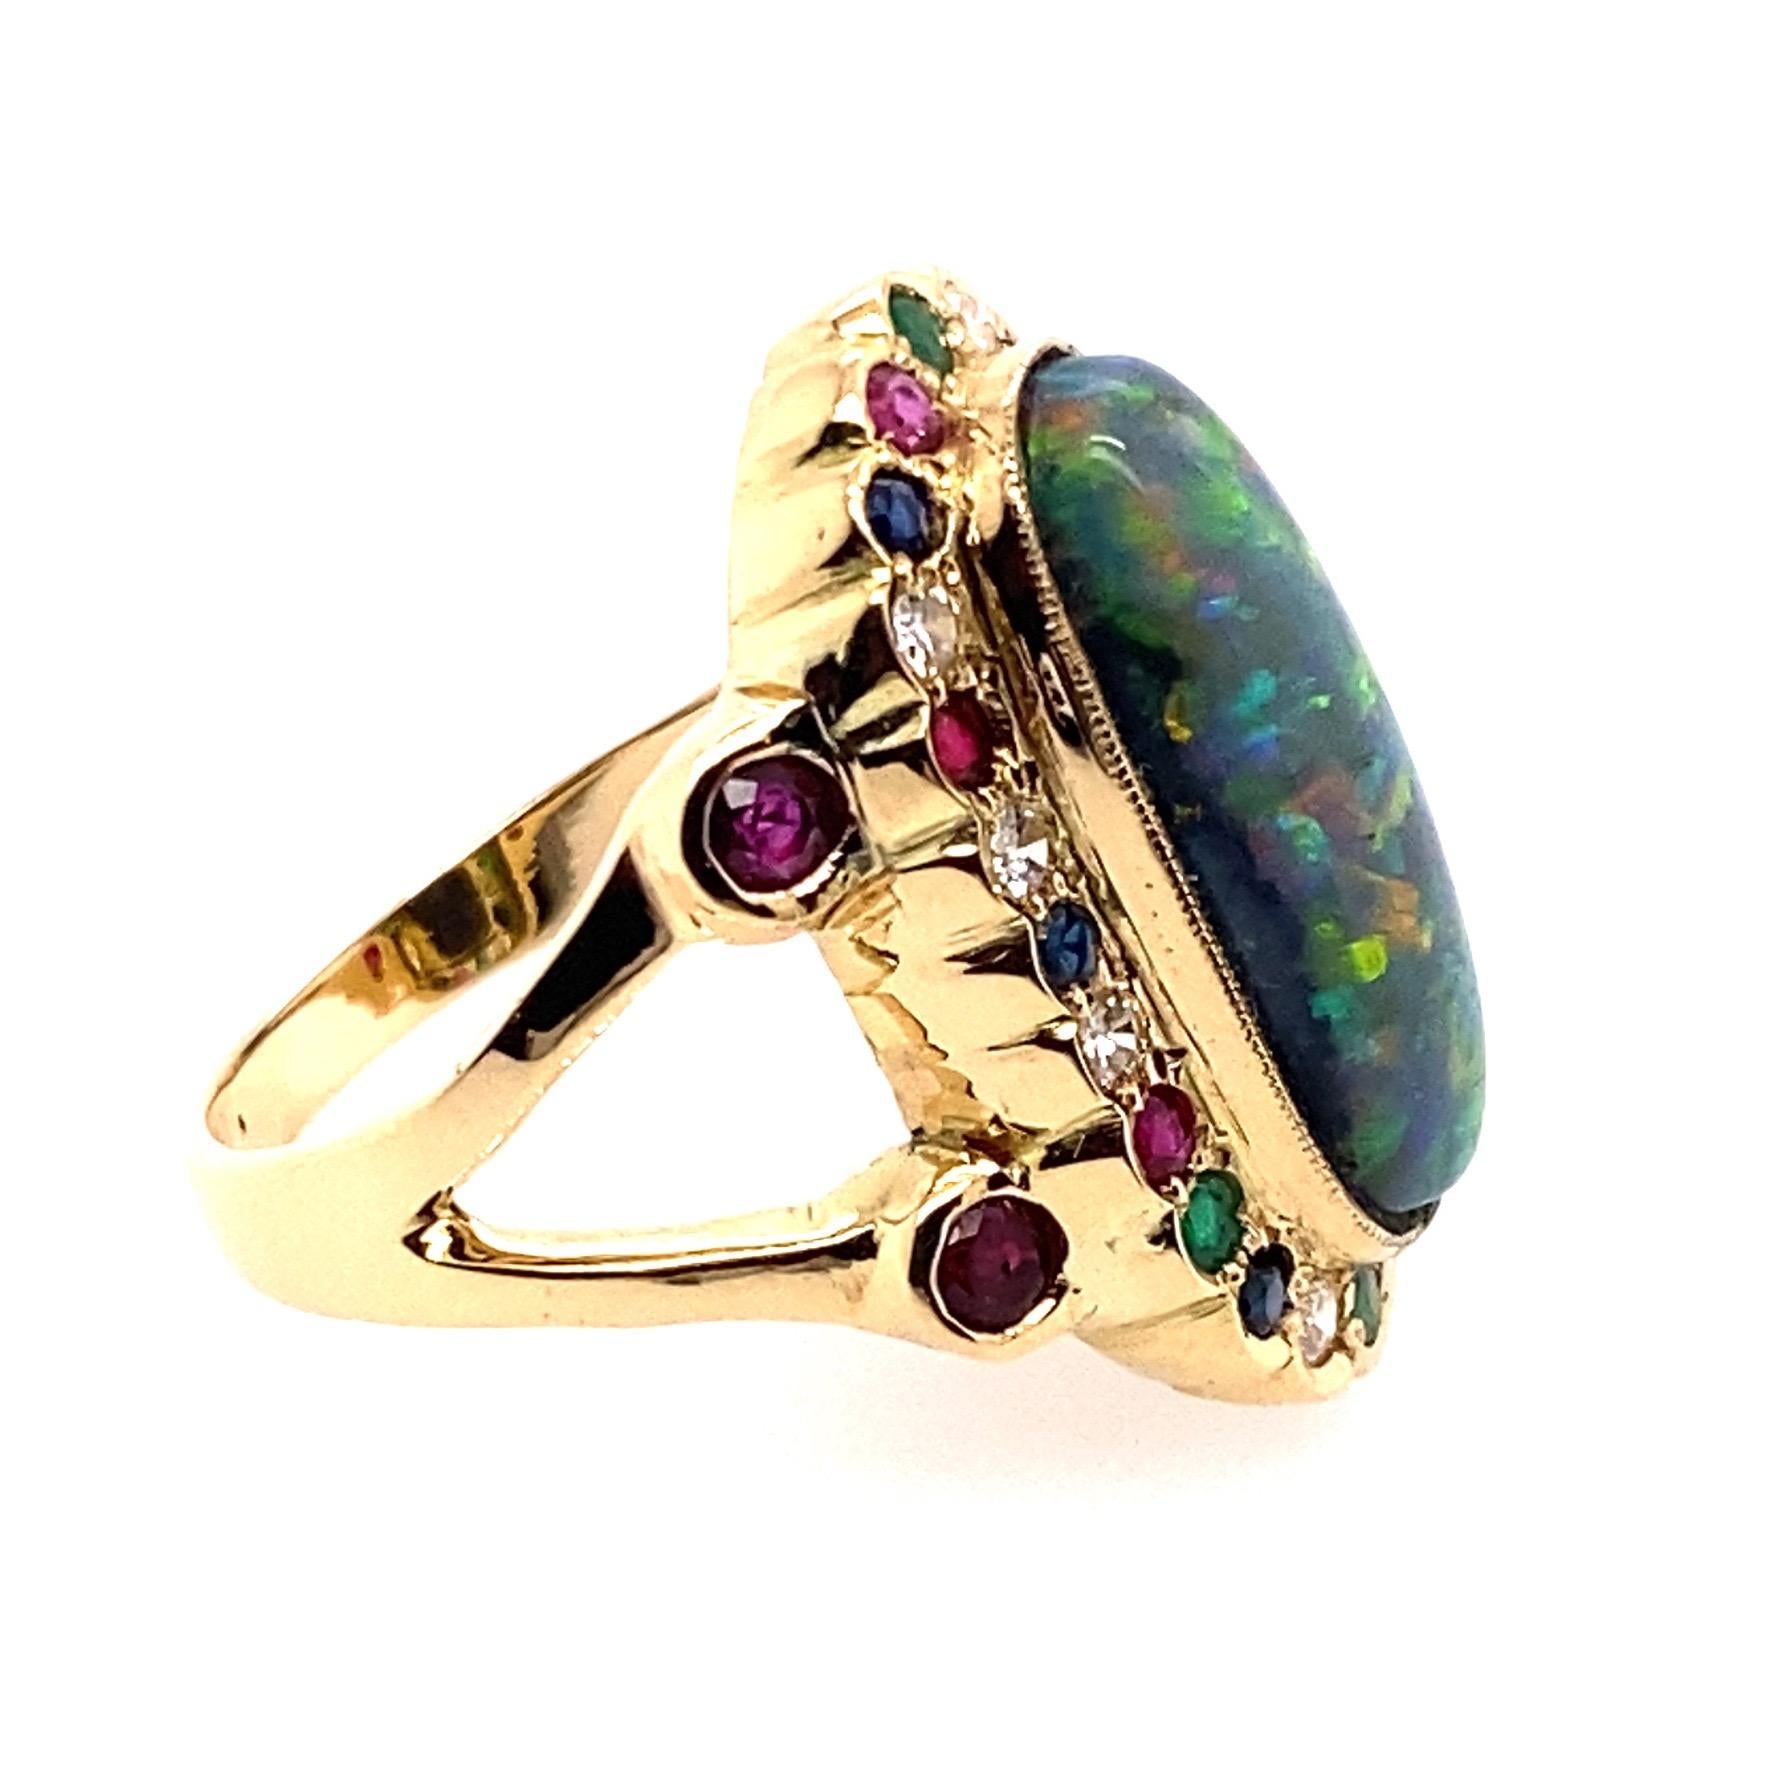 18 Karat Yellow Gold 4.60 carat Australian Black Opal Cocktail Ring

Center stone is oblong shape solid Australian black opal set in a bezel setting. Surrounding the opal are diamonds, rubies, blue sapphires and emeralds forming a cluster head.